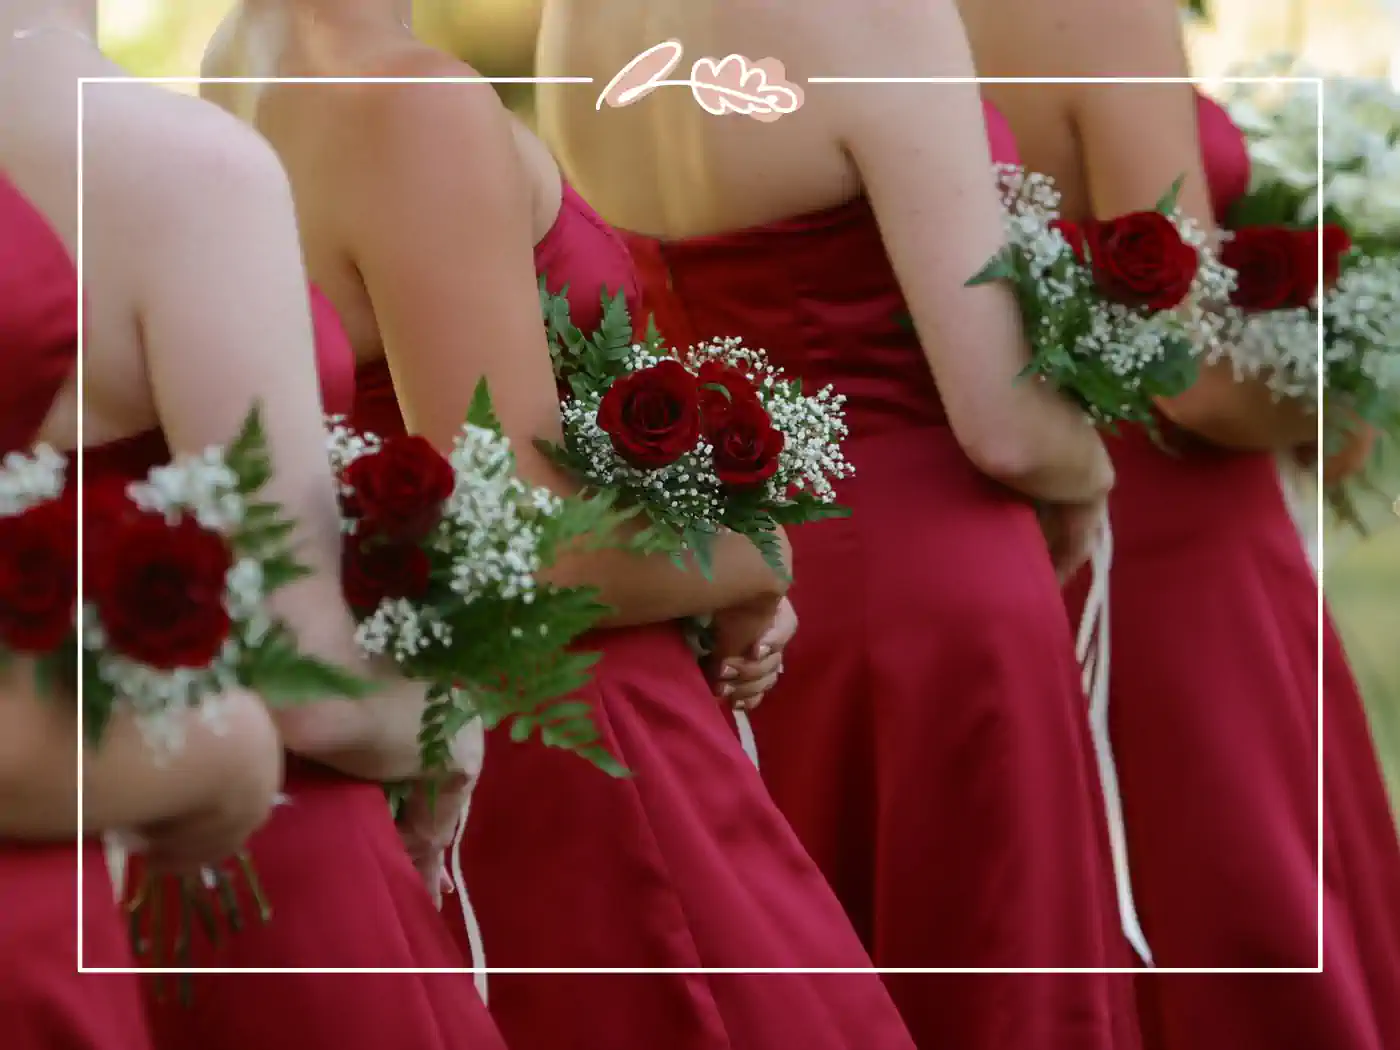 Bridesmaids holding red rose bouquets at a wedding. "Bridal Elegance" Fabulous Flowers and Gifts